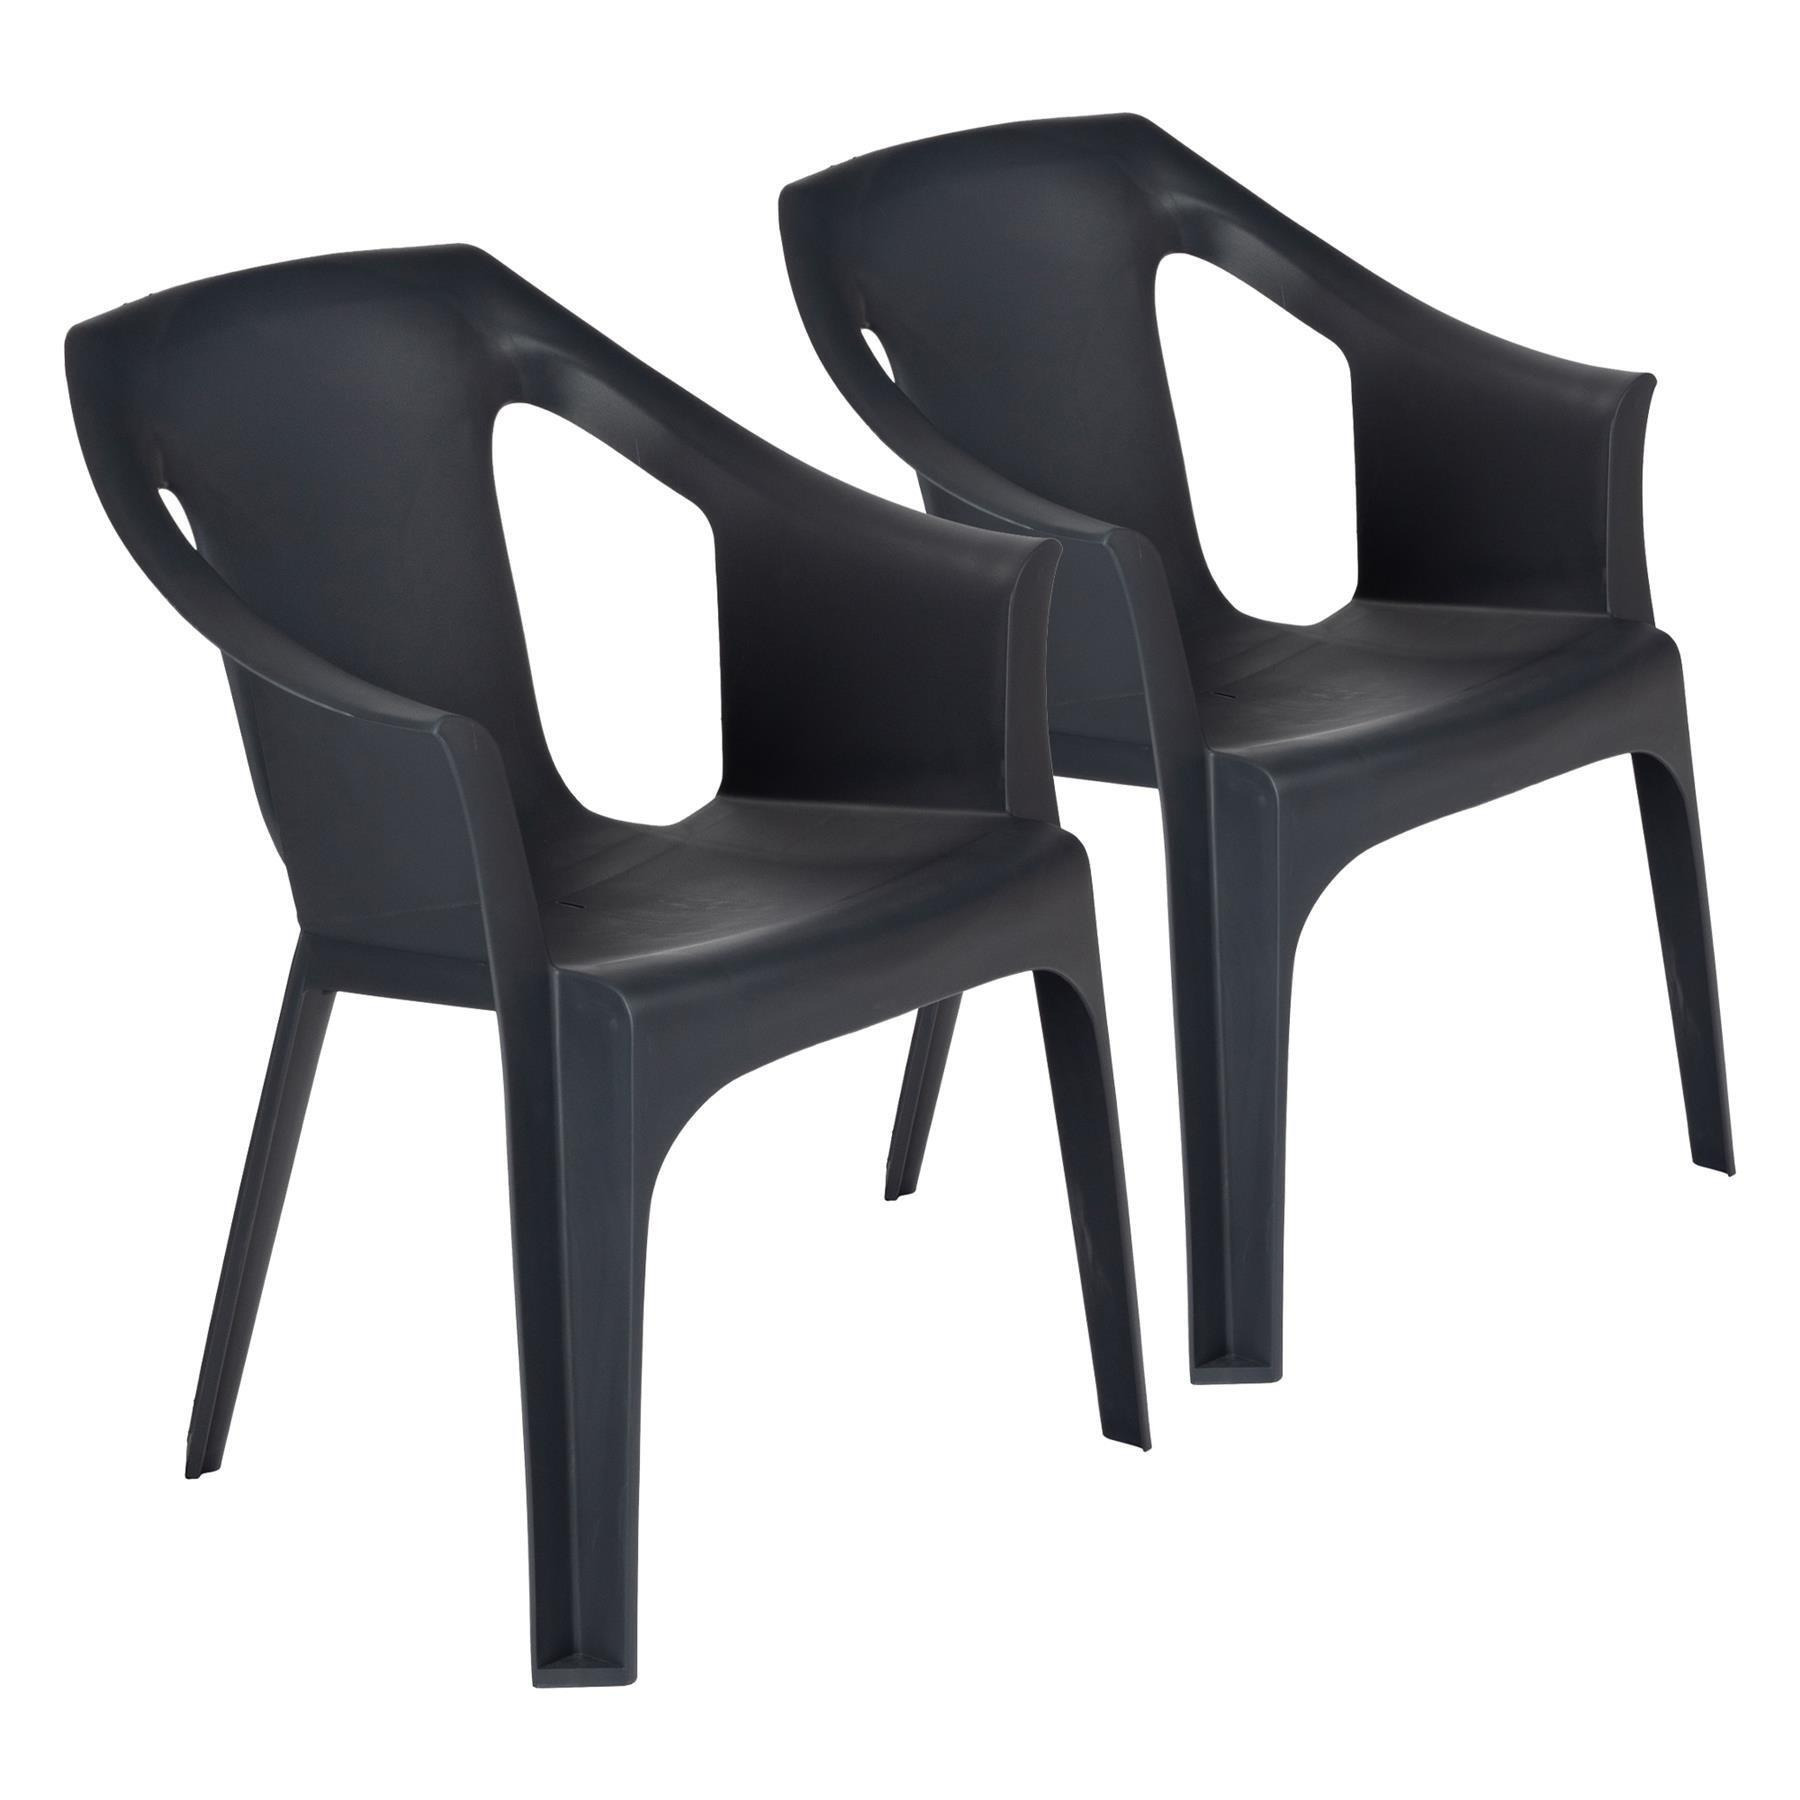 Cool Garden Dining Chairs Pack of 2 - image 1